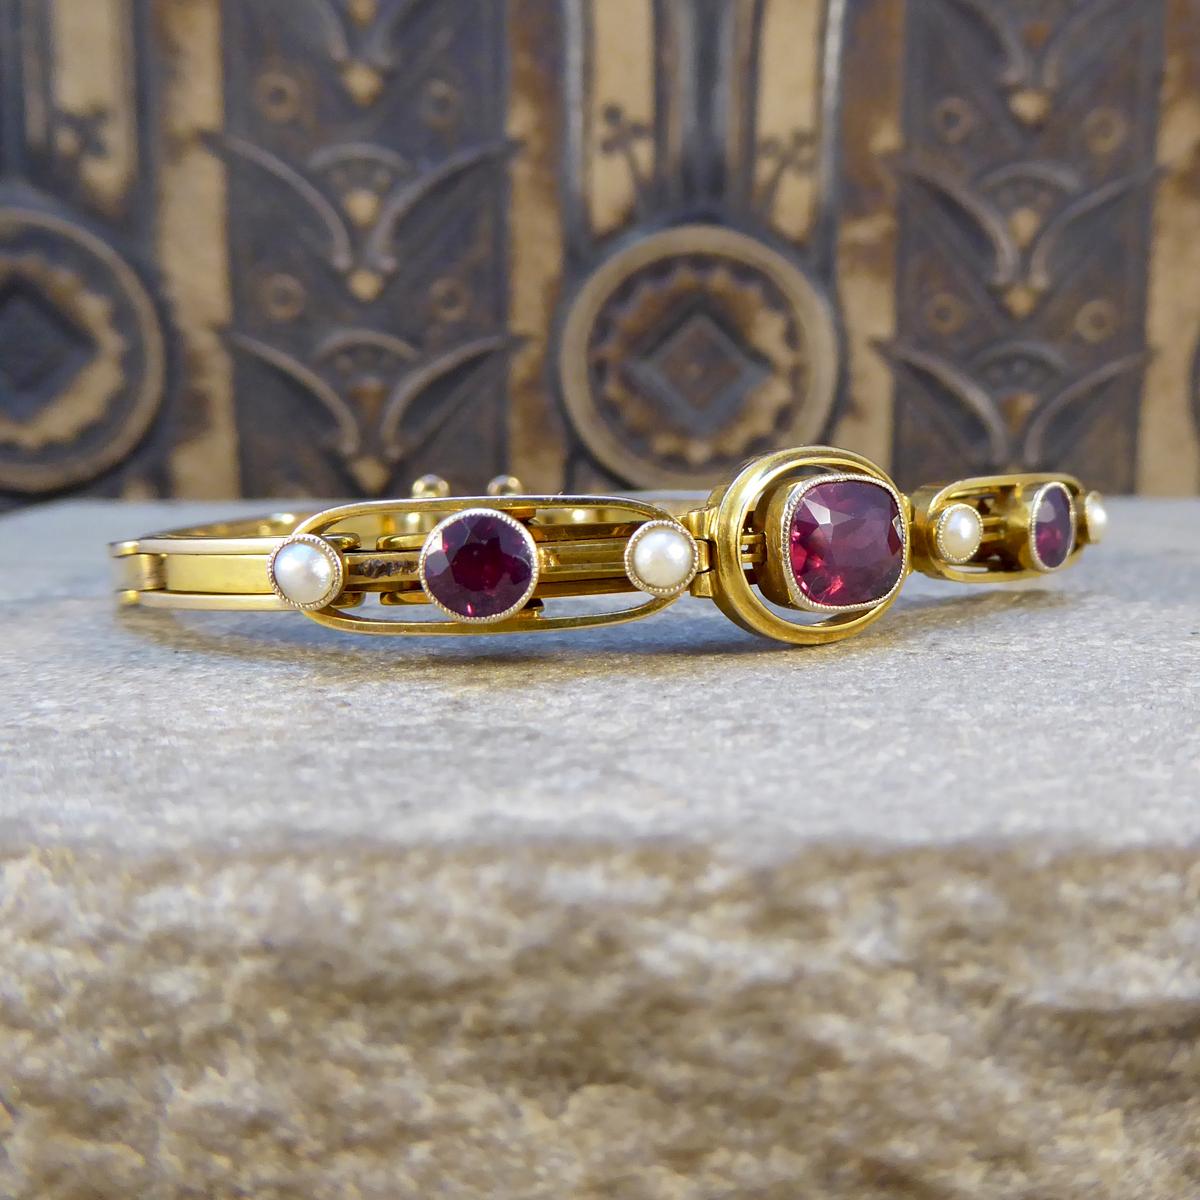 This lovely antique bracelet has been crafted in the Edwardian era from 9ct Yellow Gold, with very clear stamps on the inside. It features 3 Garnets and 4 Pearls alternating across the head of the bracelet attached to an expandable panel bracelet to